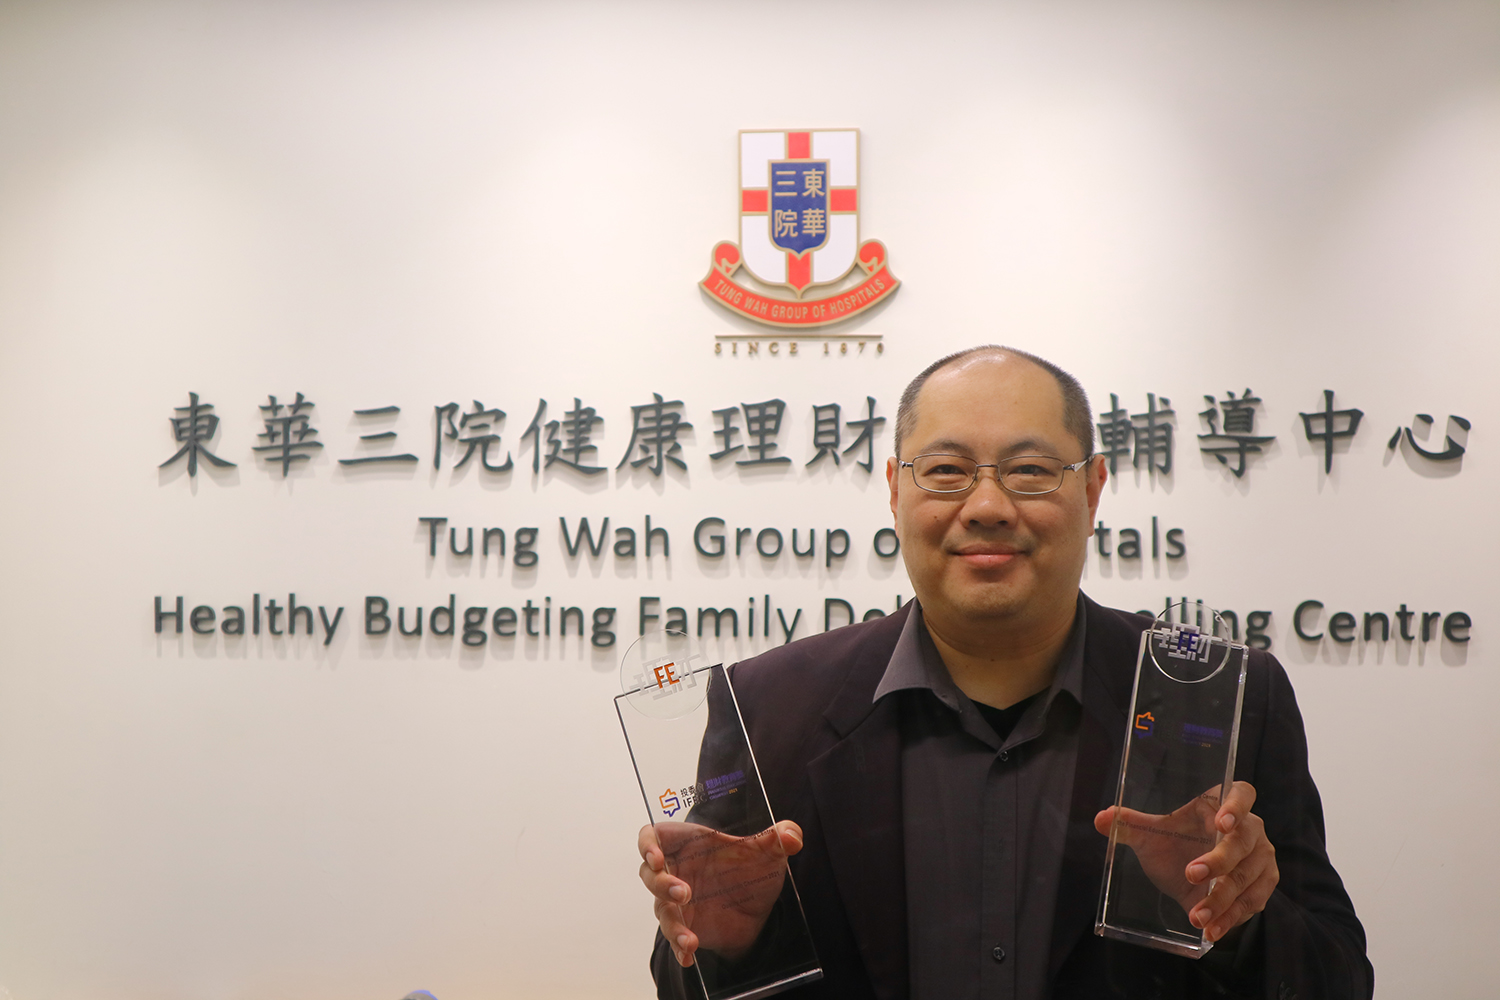 Tung Wah Group of Hospitals Healthy Budgeting Family Debt Counselling Centre